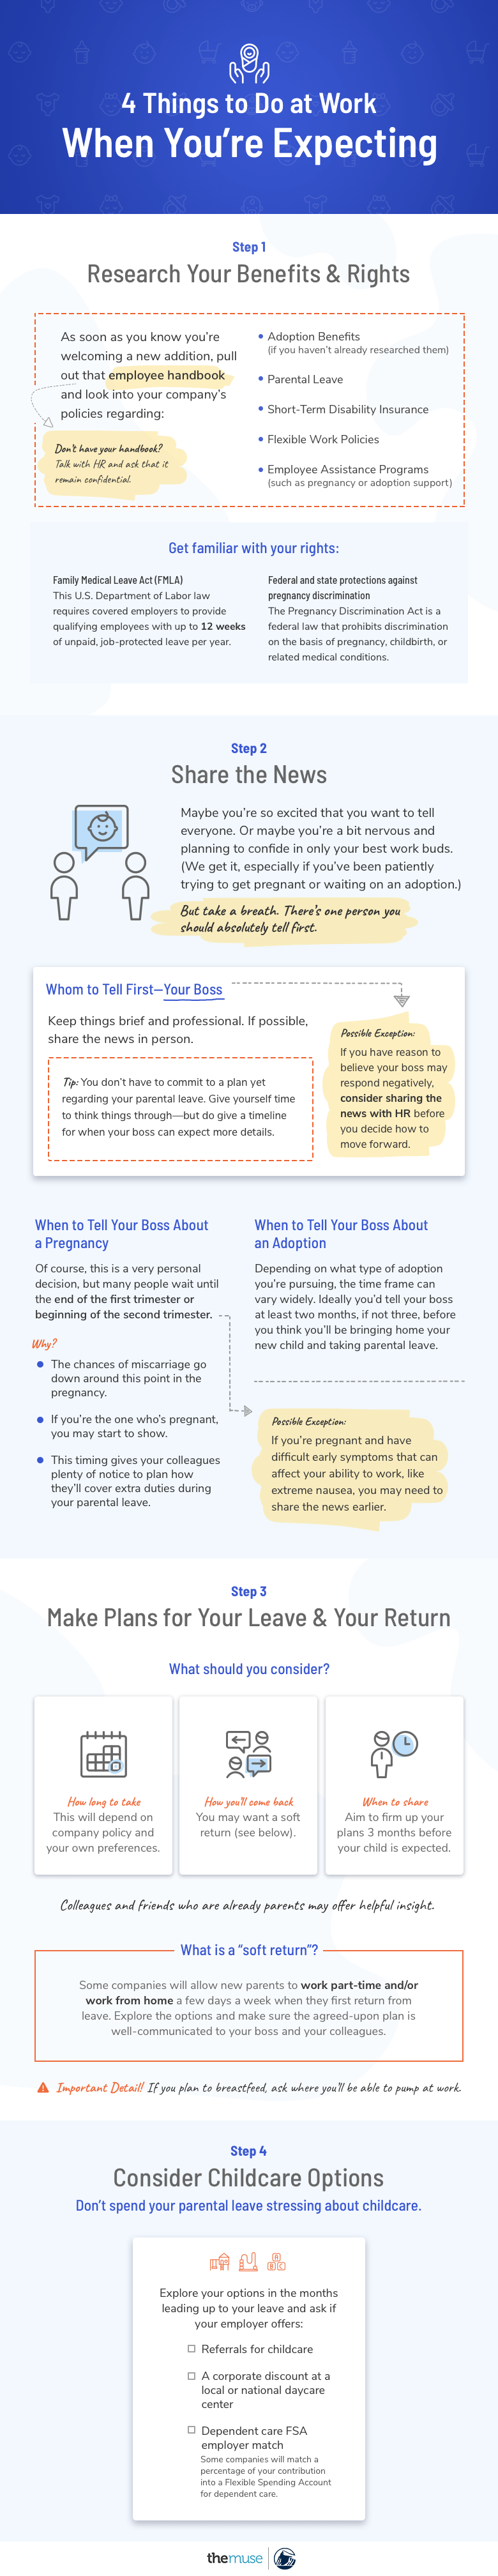 infographic explaining 4 steps to take: Research your benefits and rights. Share the news. Make plans for your leave. Consider childcare options.